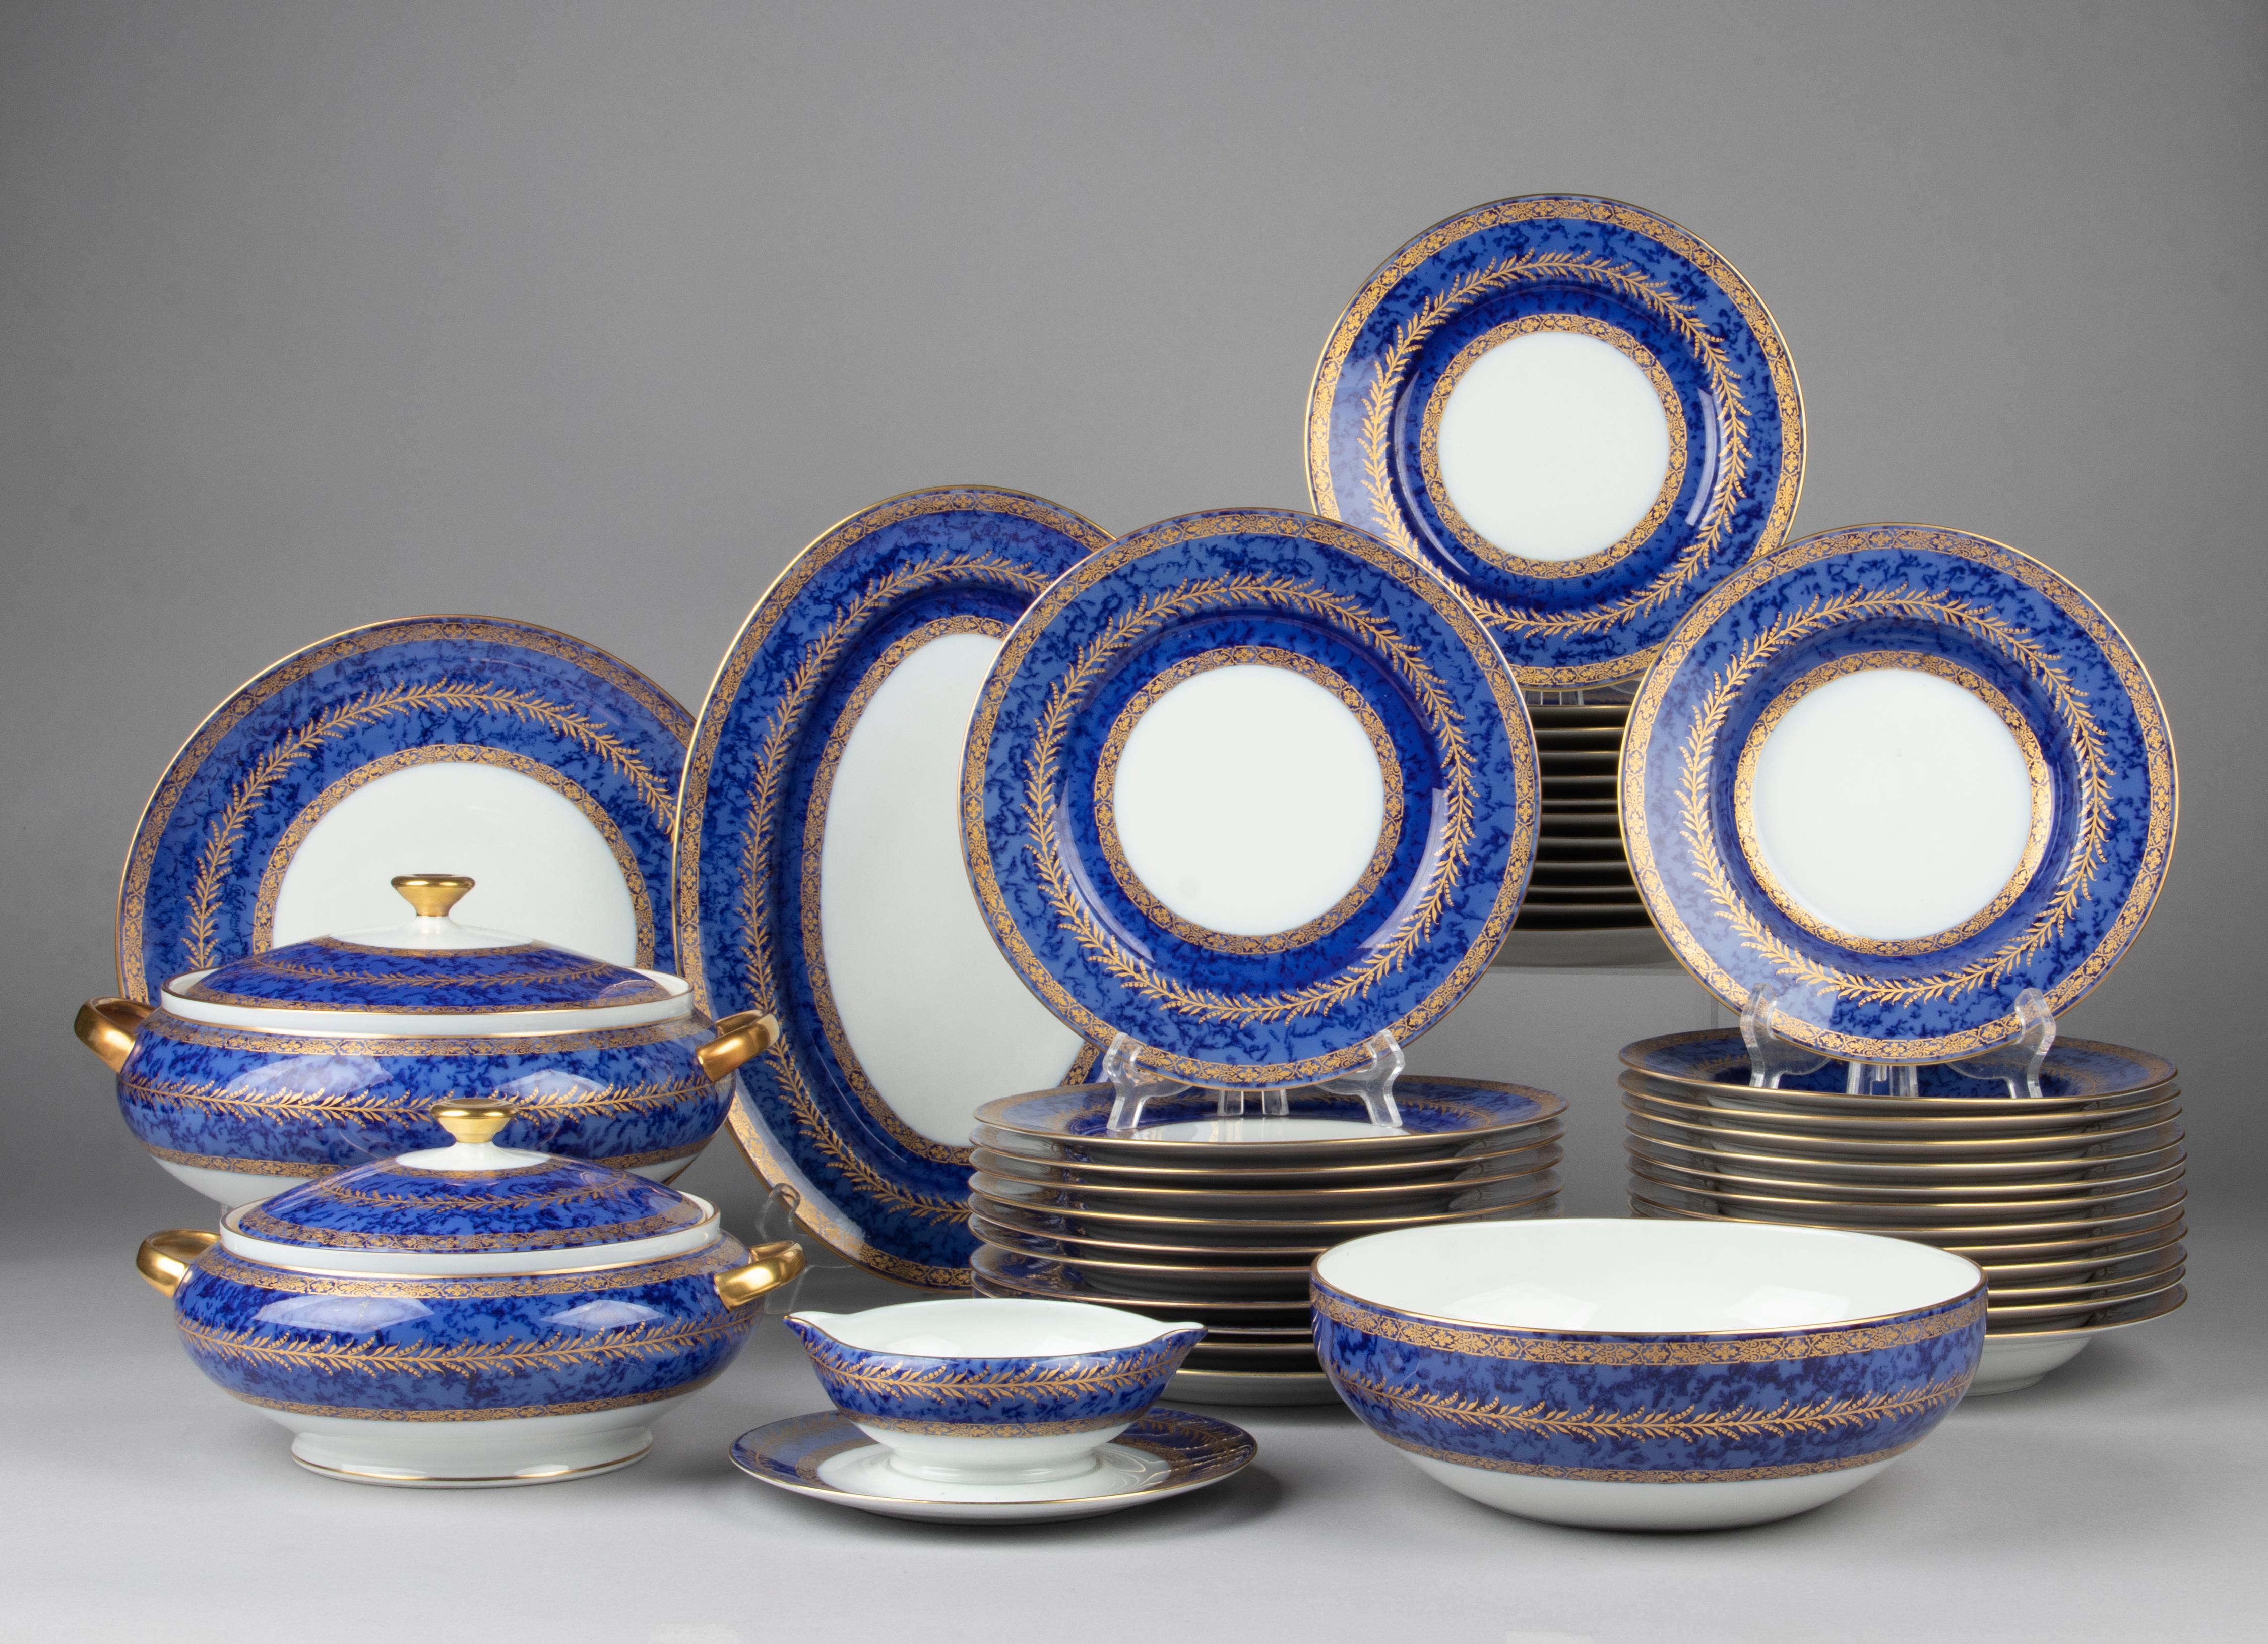 Beautiful set of porcelain tableware made by the French brand Raynaud Limoges. The porcelain has a deep blue color, with a kind of cloudy pattern, decorated with gold-coloured accents. The service is made by Raynaud Limoges. On the back of the